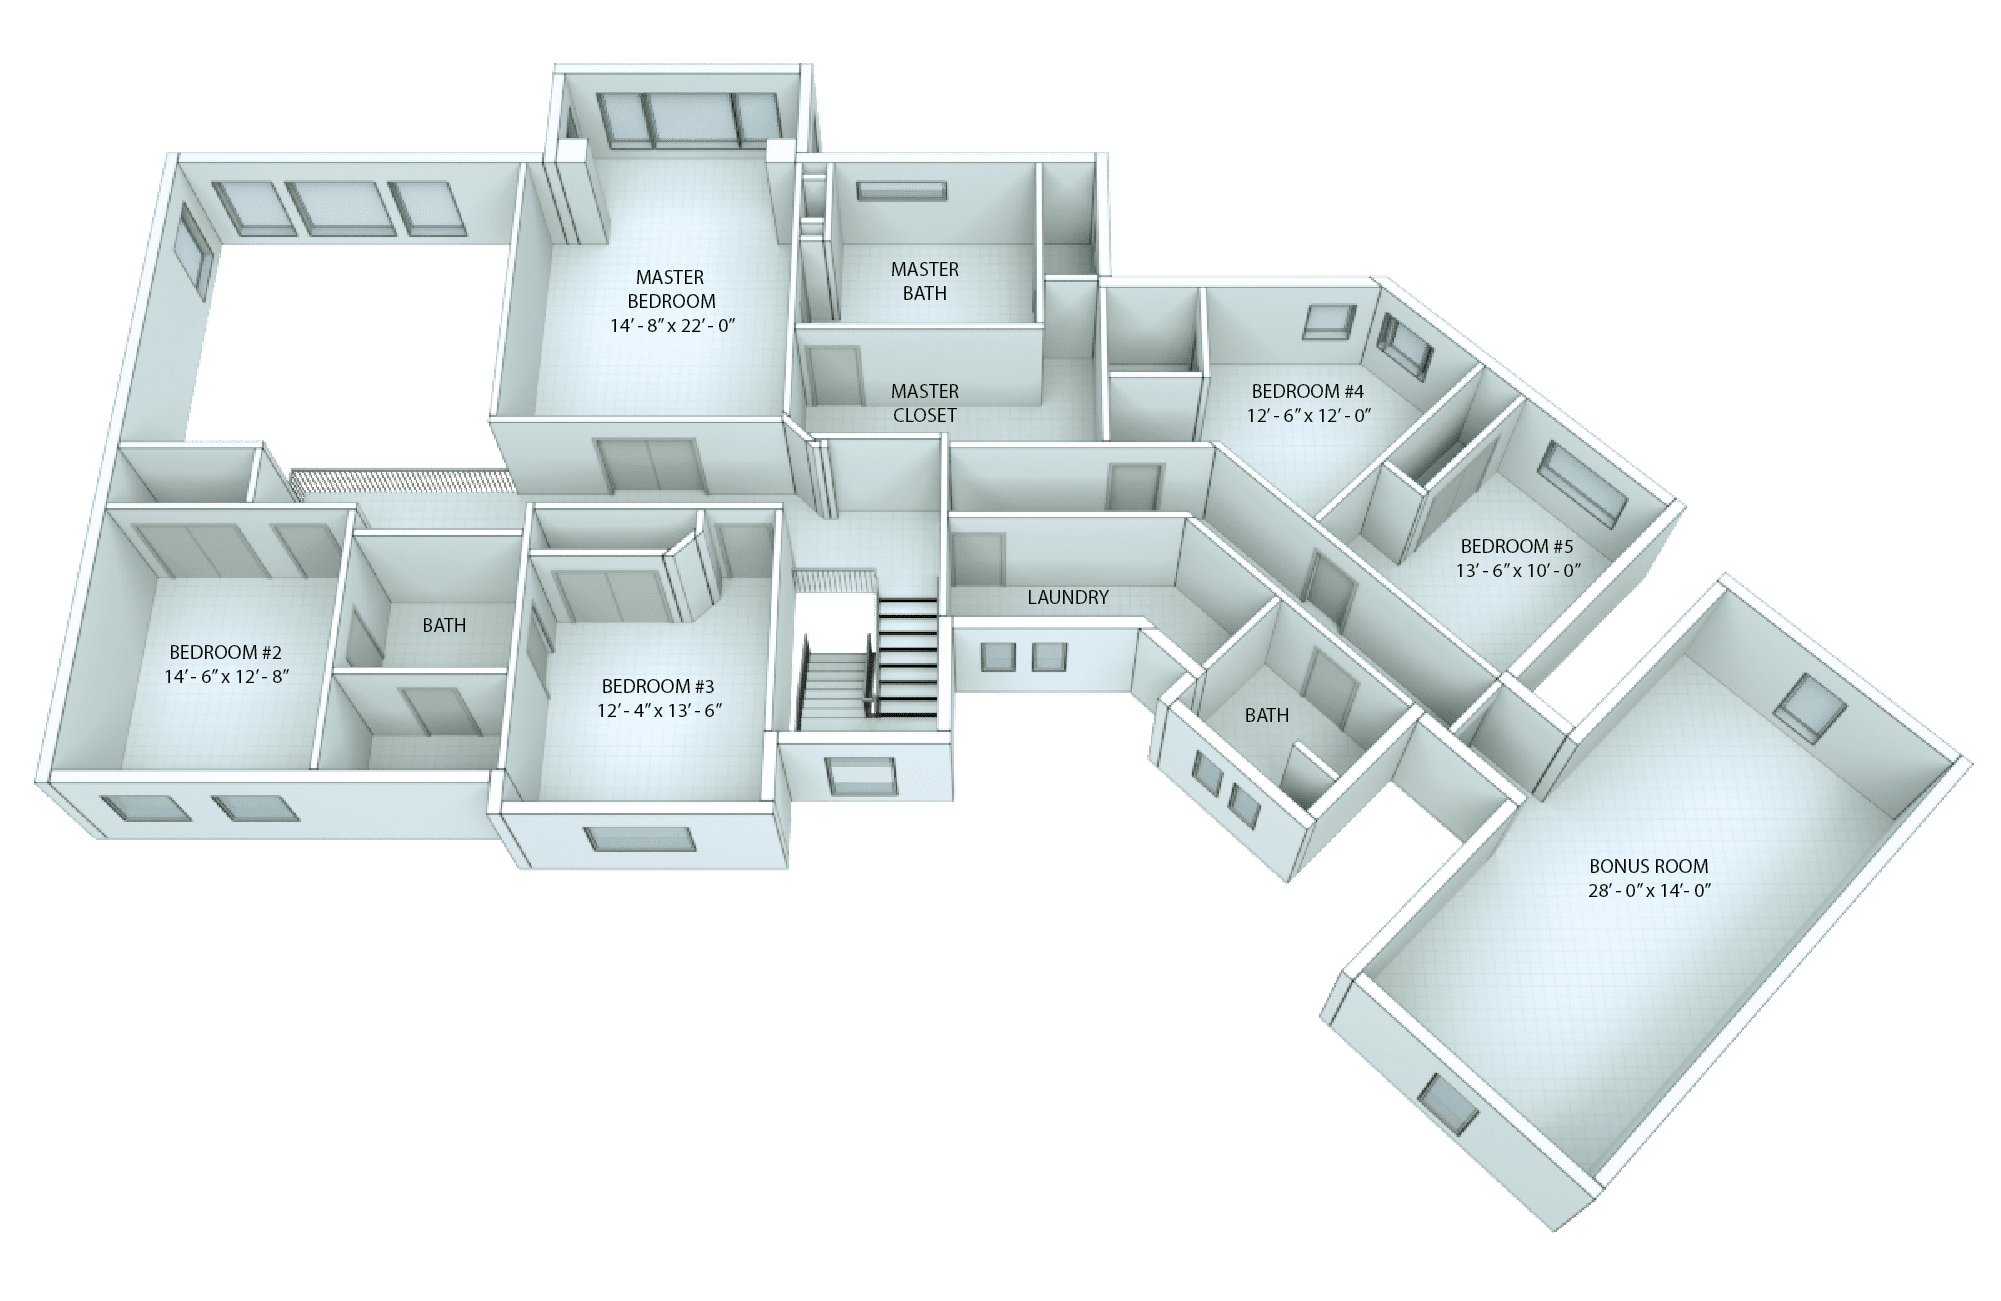 3D floor plan with room labels and dimensions